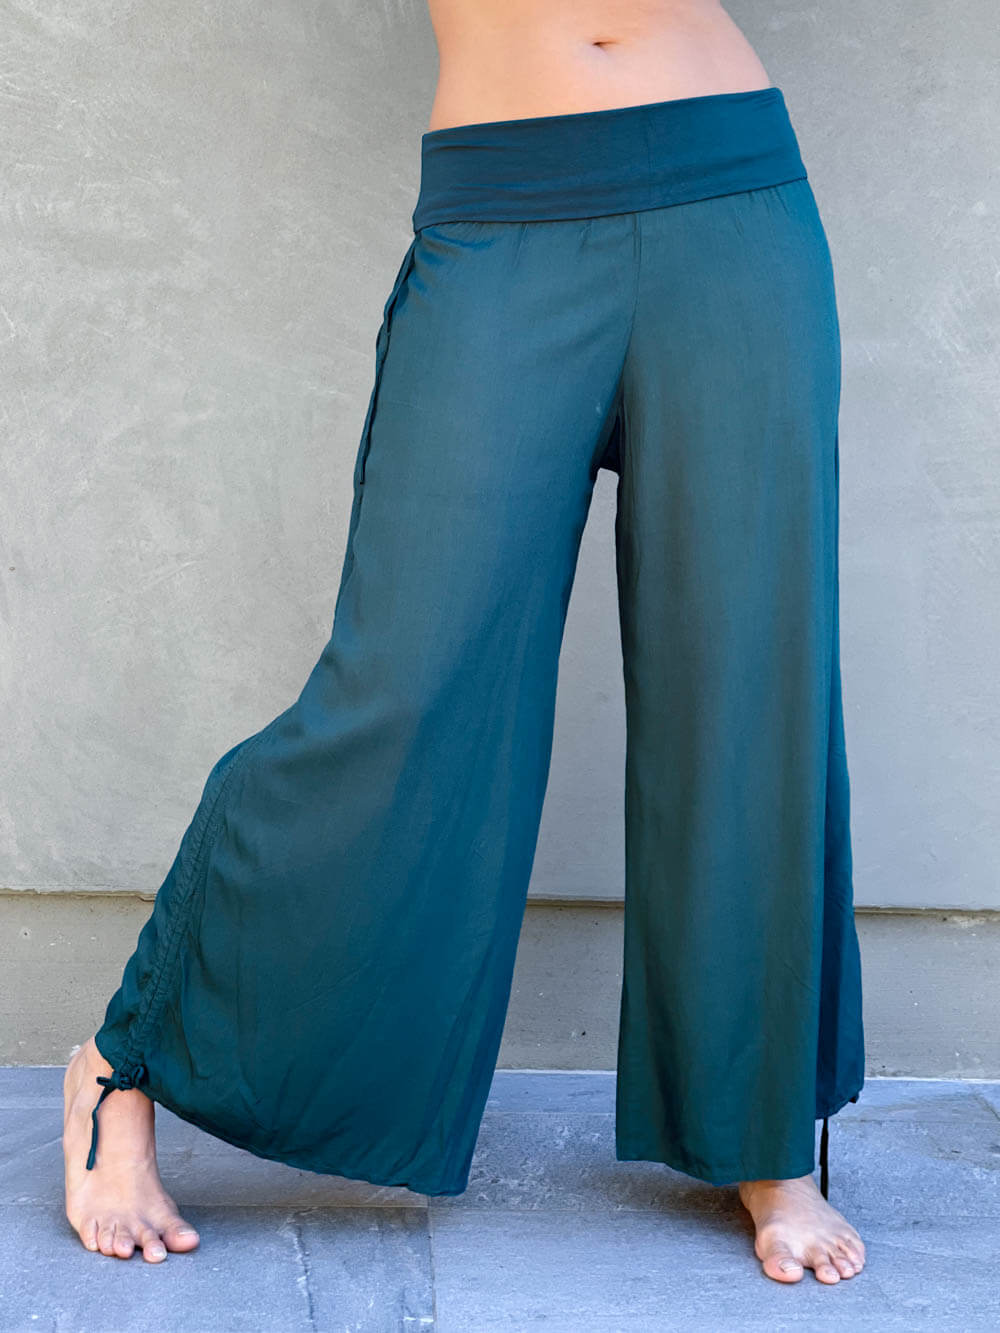 women's natural rayon lightweight loose fit adjustable teal blue side ruched pants with stretchy wide waistband #color_teal